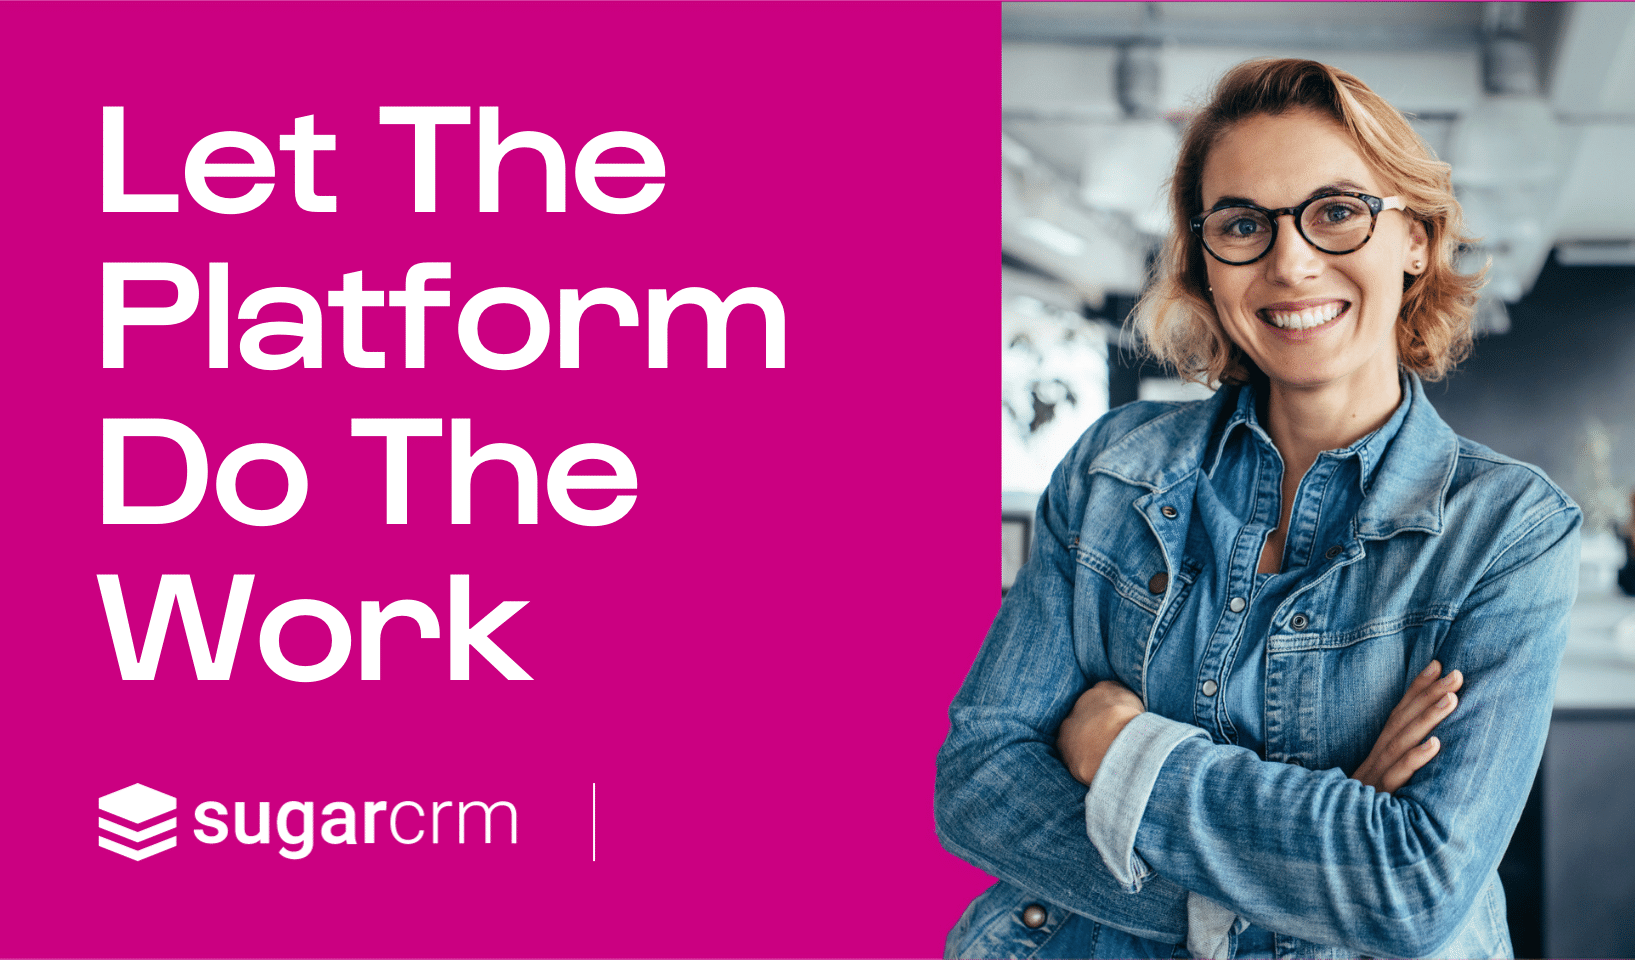 It's Time to Let the Platform Do the Work